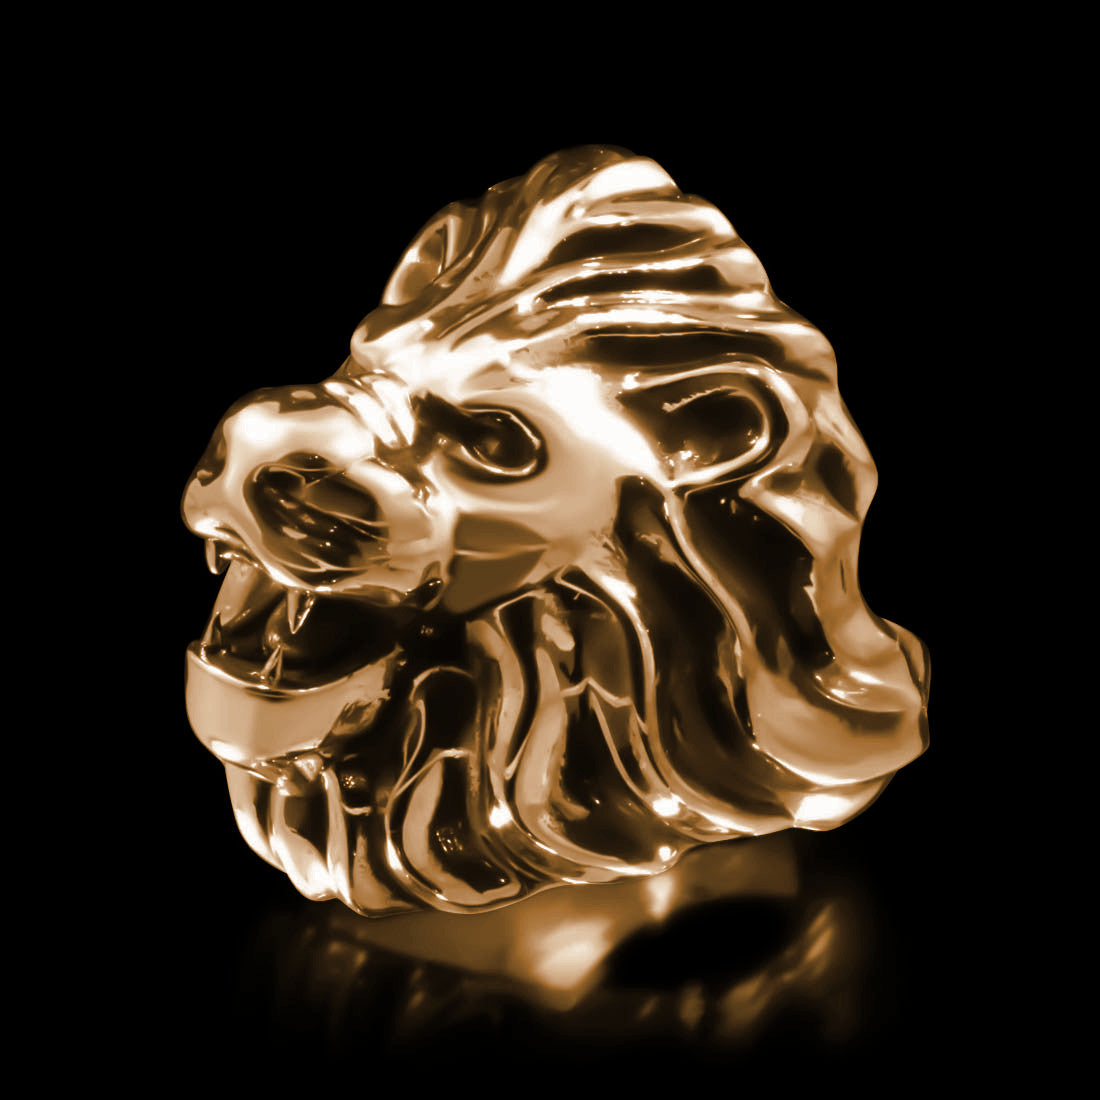 1 Gram Gold Forming Lion Face Attention-getting Design Ring For Men - Style  A299 at Rs 1900.00 | Rajkot| ID: 2850547261530